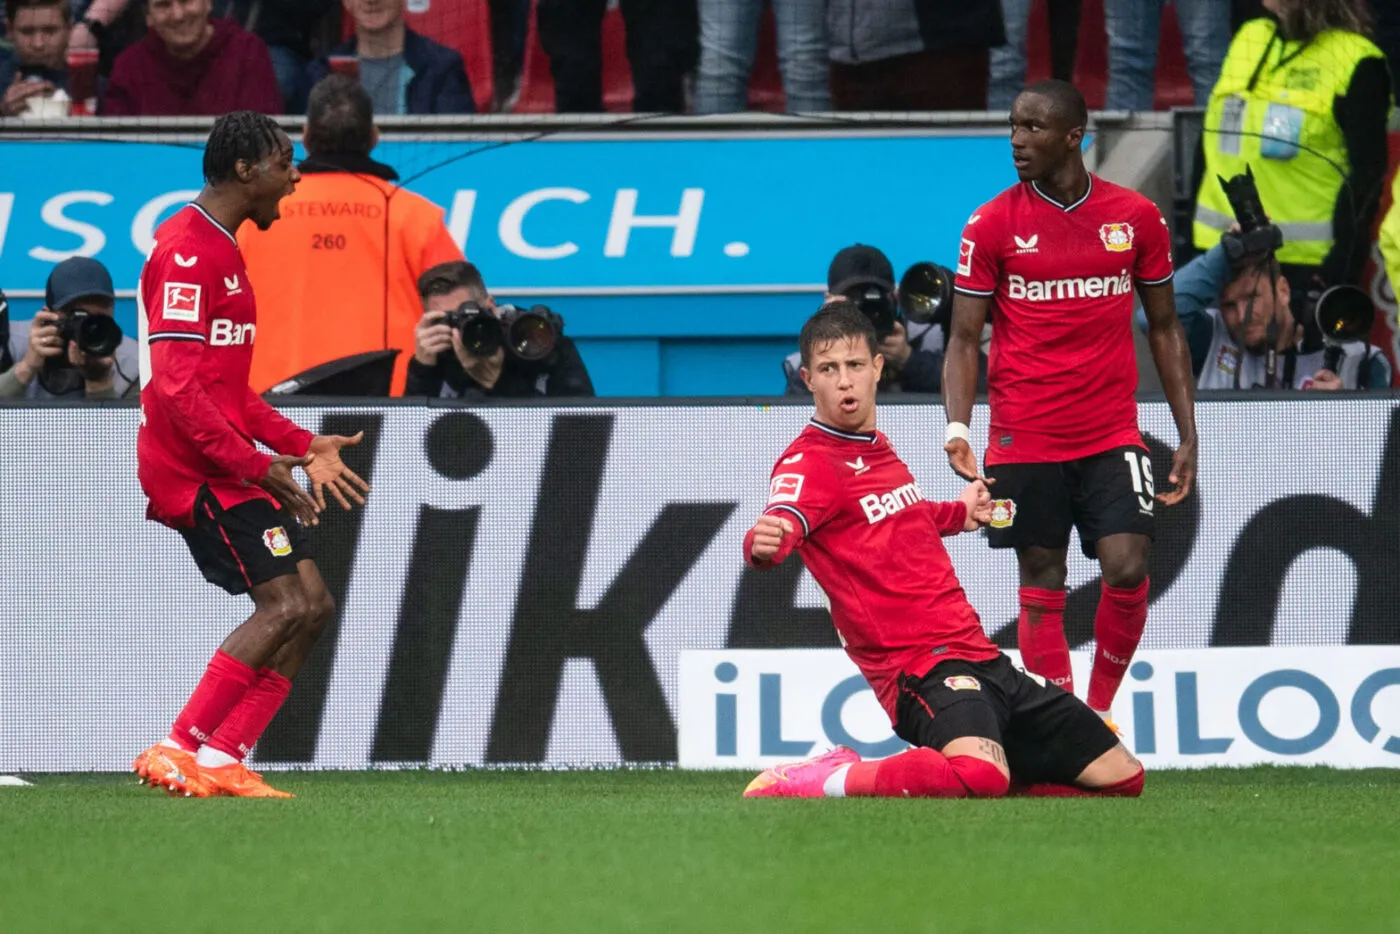 23 April 2023, North Rhine-Westphalia, Leverkusen: Soccer: Bundesliga, Bayer Leverkusen - RB Leipzig, Matchday 29, BayArena. Leverkusen's goal scorer Adam Hlozek (center), Jeremie Frimpong (left) and Moussa Diaby celebrate after scoring for the 1:0 lead. Photo: Marius Becker/dpa - IMPORTANT NOTE: In accordance with the requirements of the DFL Deutsche Fu - Photo by Icon sport